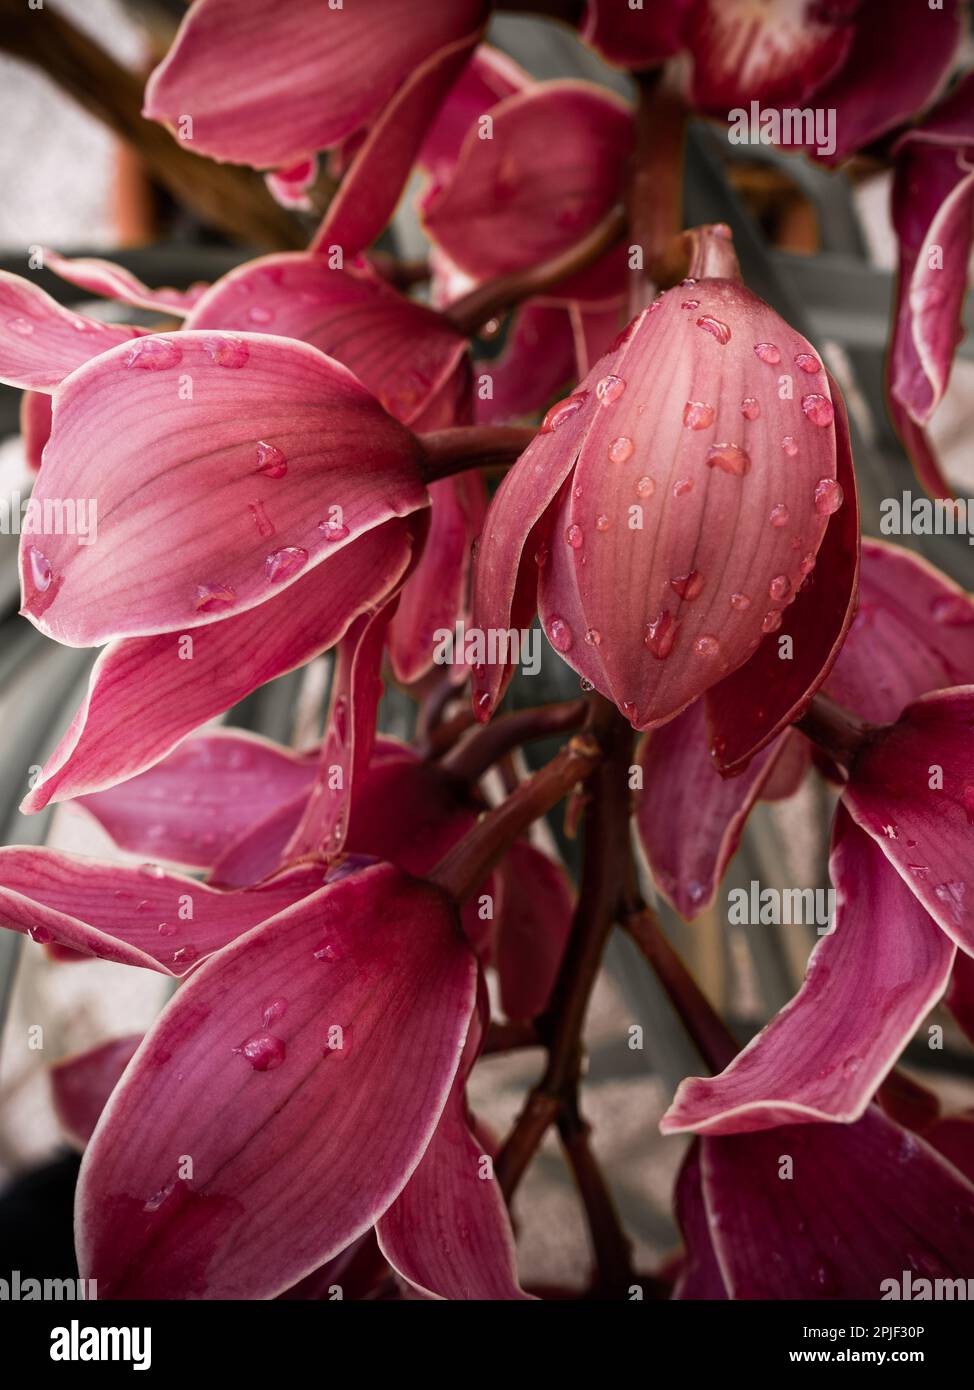 A flower stem or spike with Cymbidium Australian Red orchids or Cymbidium Black Silk with water droplets on petals. Selective focus Stock Photo